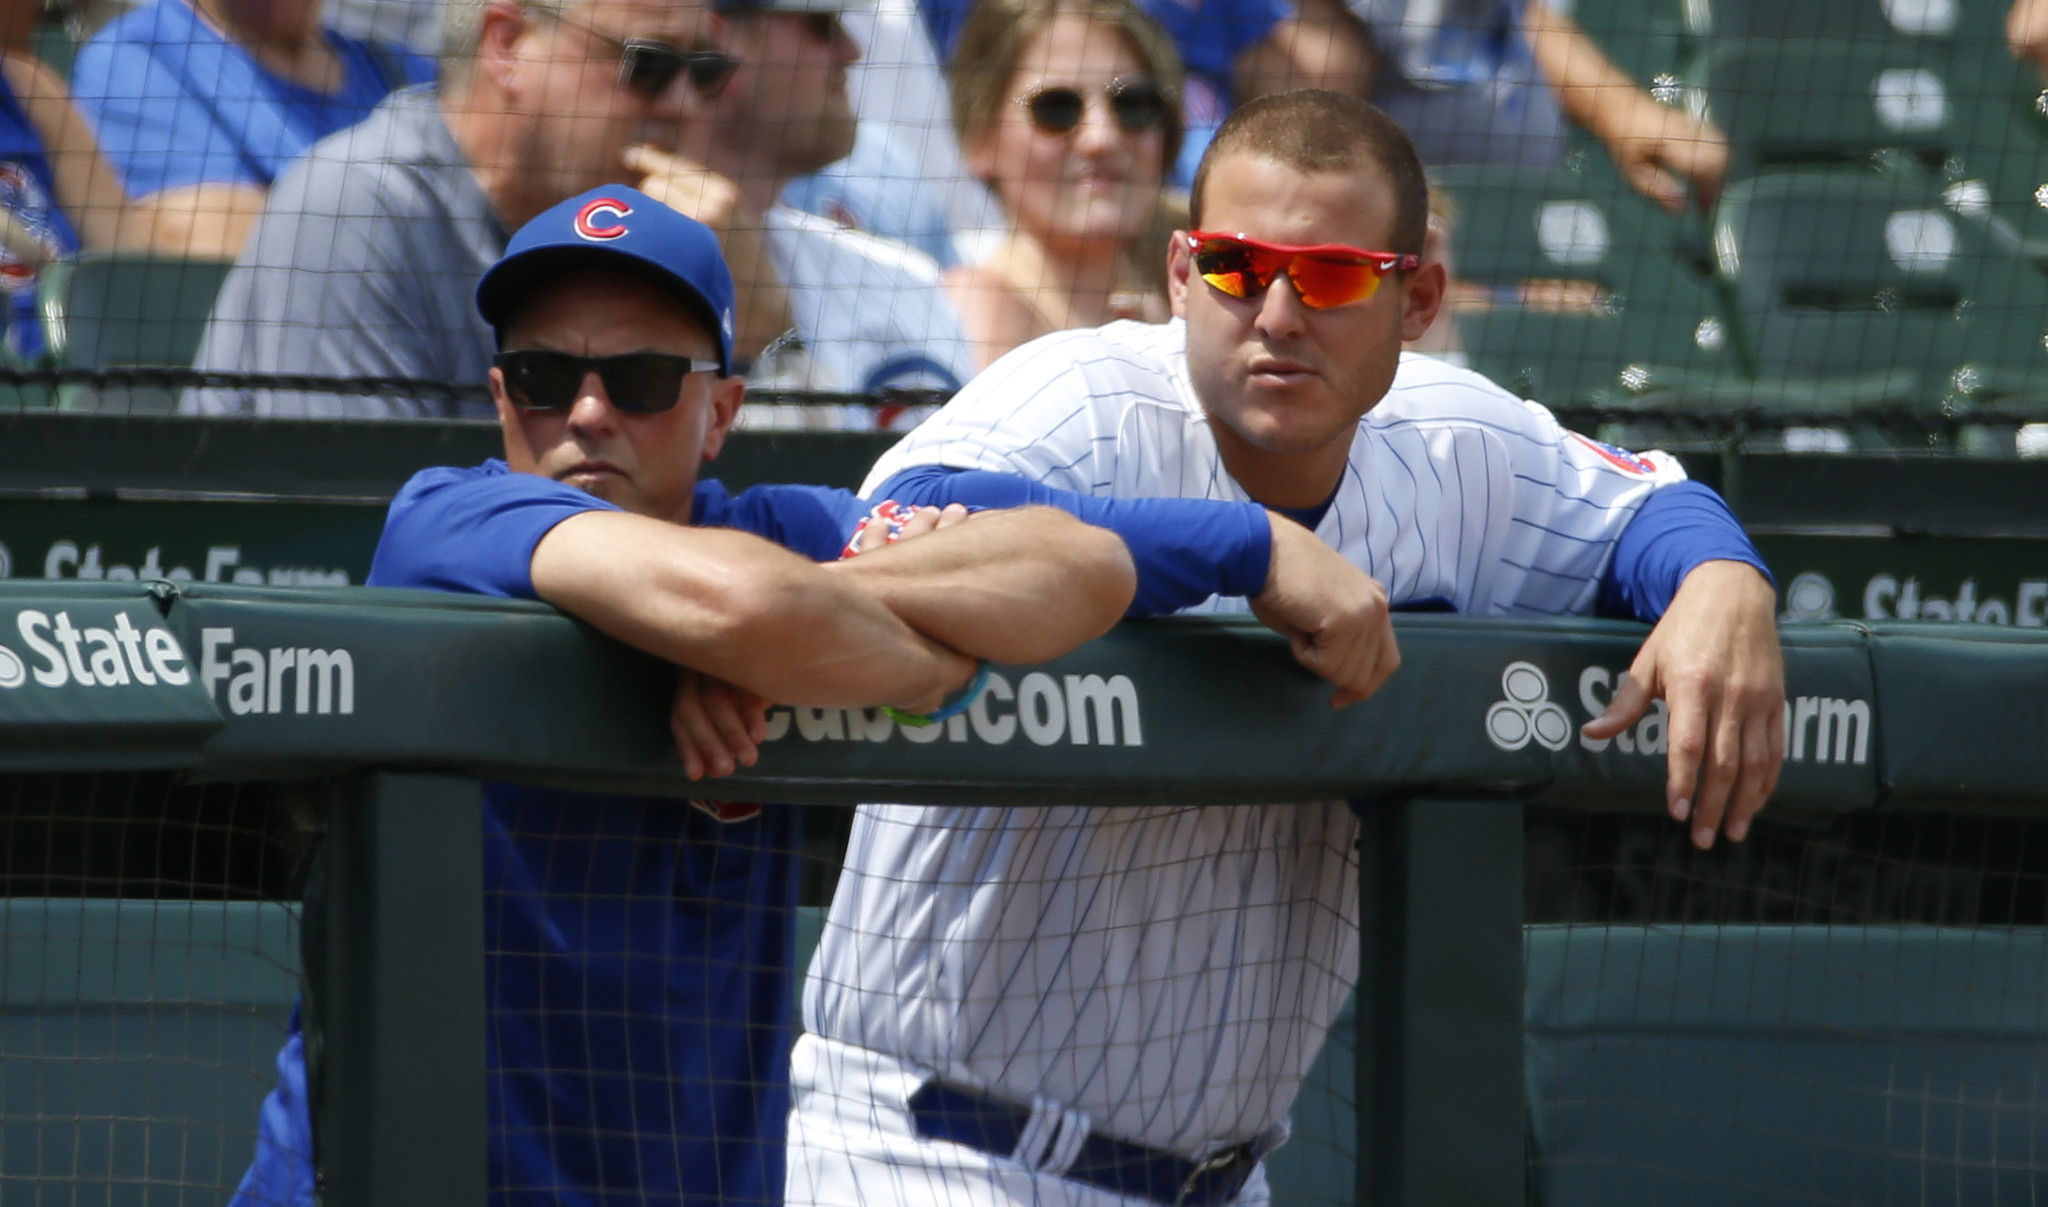 Anthony Rizzo Thanked for $1 million donation, Visits with Cancer